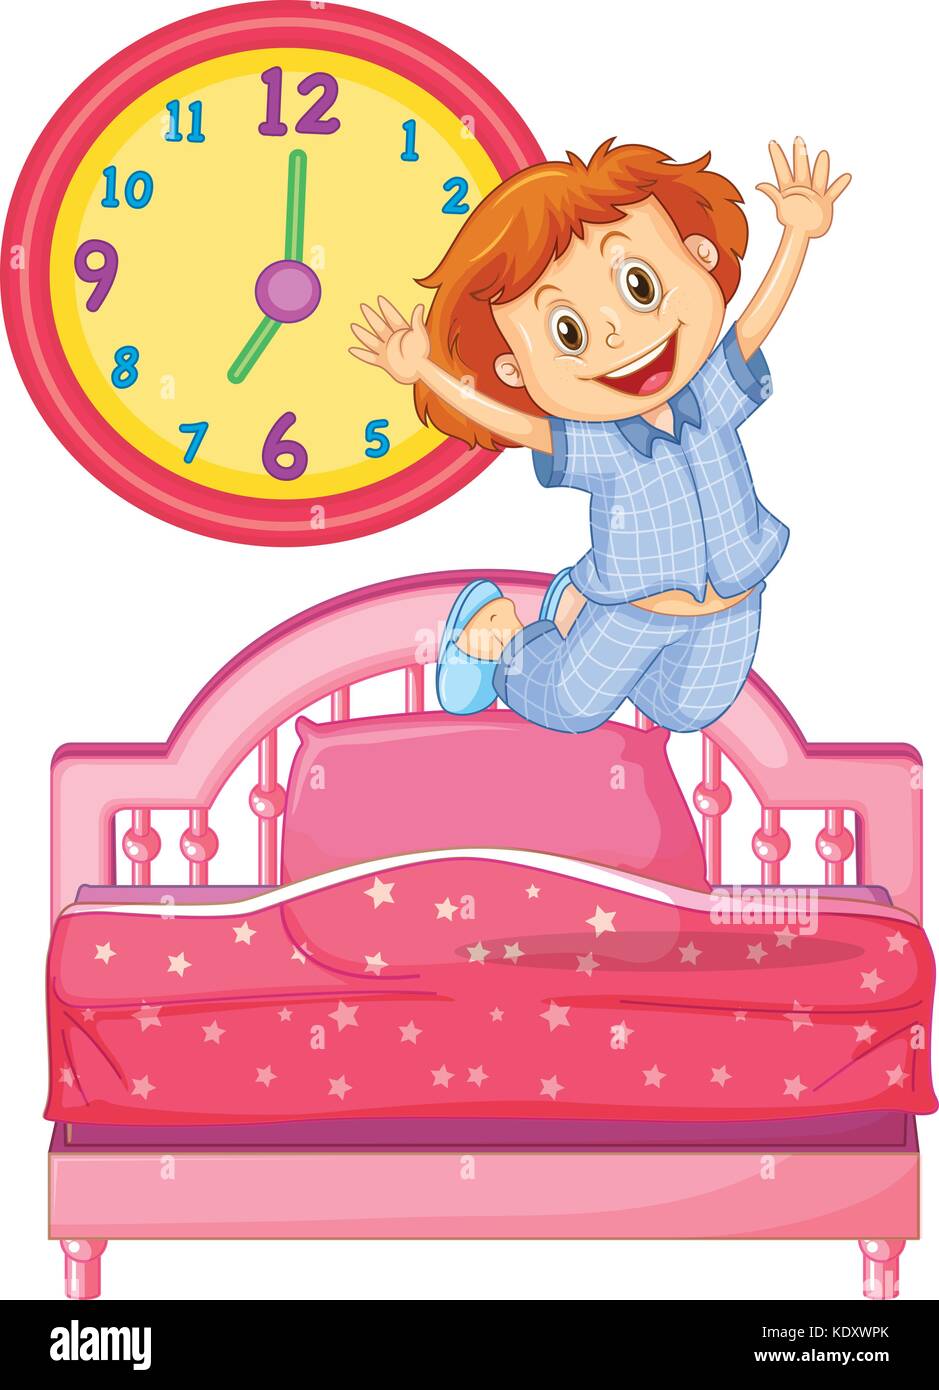 Little girl waking up from the bed illustration Stock Vector